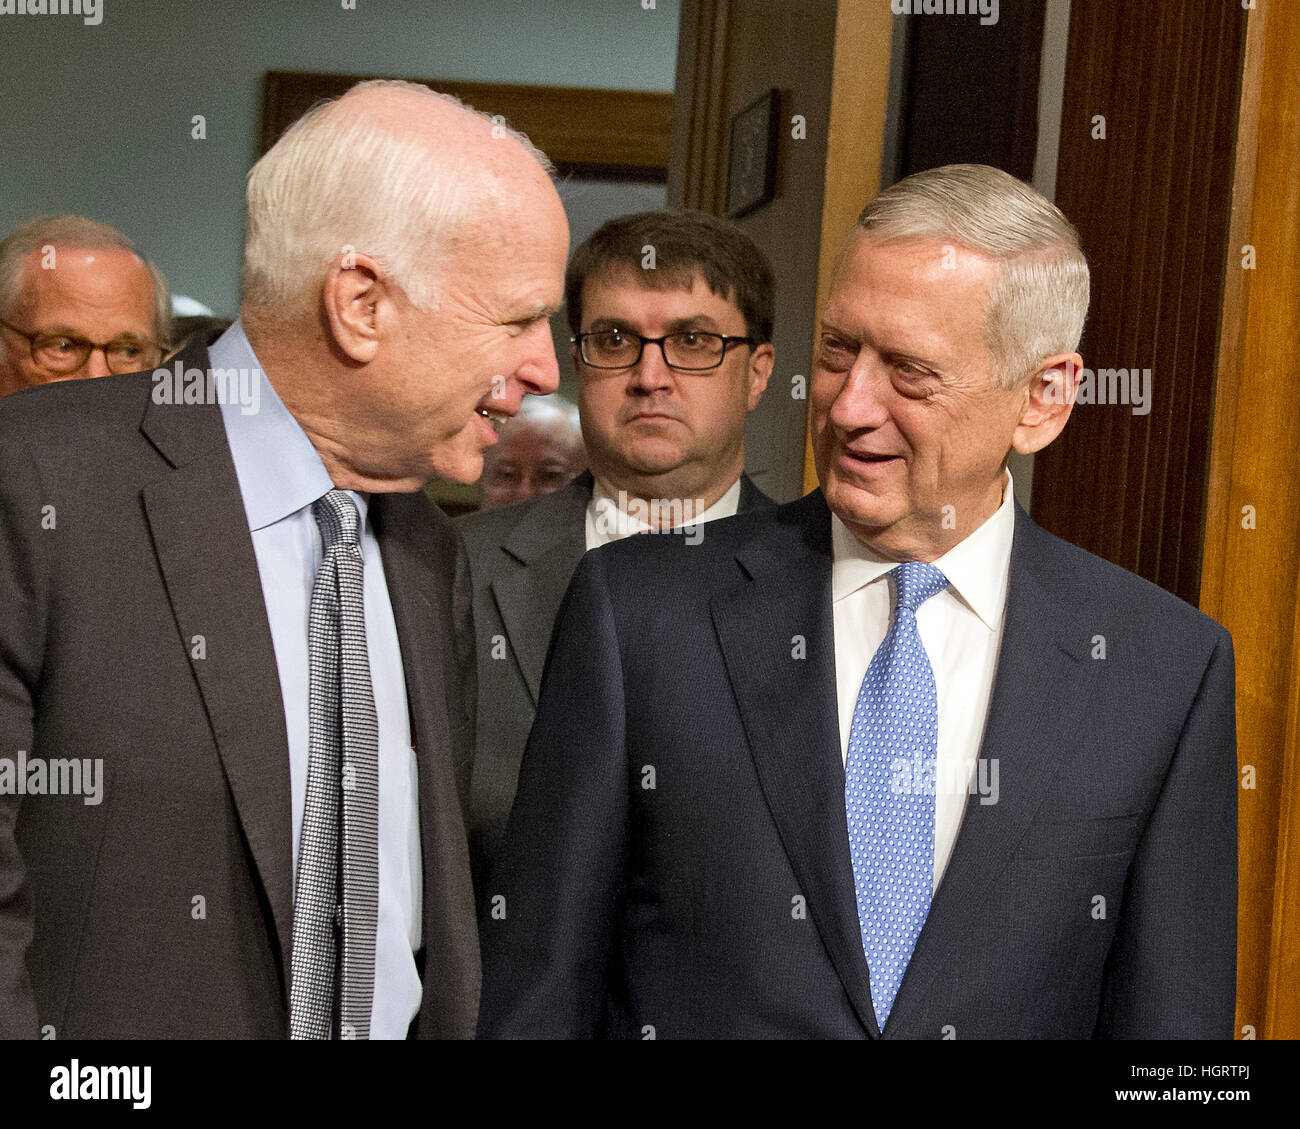 Washington DC, USA. 12th January 2017. United States Senator John McCain (Republican of Arizona), Chairman, US Senate Committee on Armed Services, left, escorts US Marine Corps General James N. Mattis (retired), right, into the room as committee holds a confirmation hearing on Mattis' nomination to be Secretary of Defense on Capitol Hill in Washington, DC on Thursday, January 12, 2017. Credit: MediaPunch Inc/Alamy Live News Stock Photo